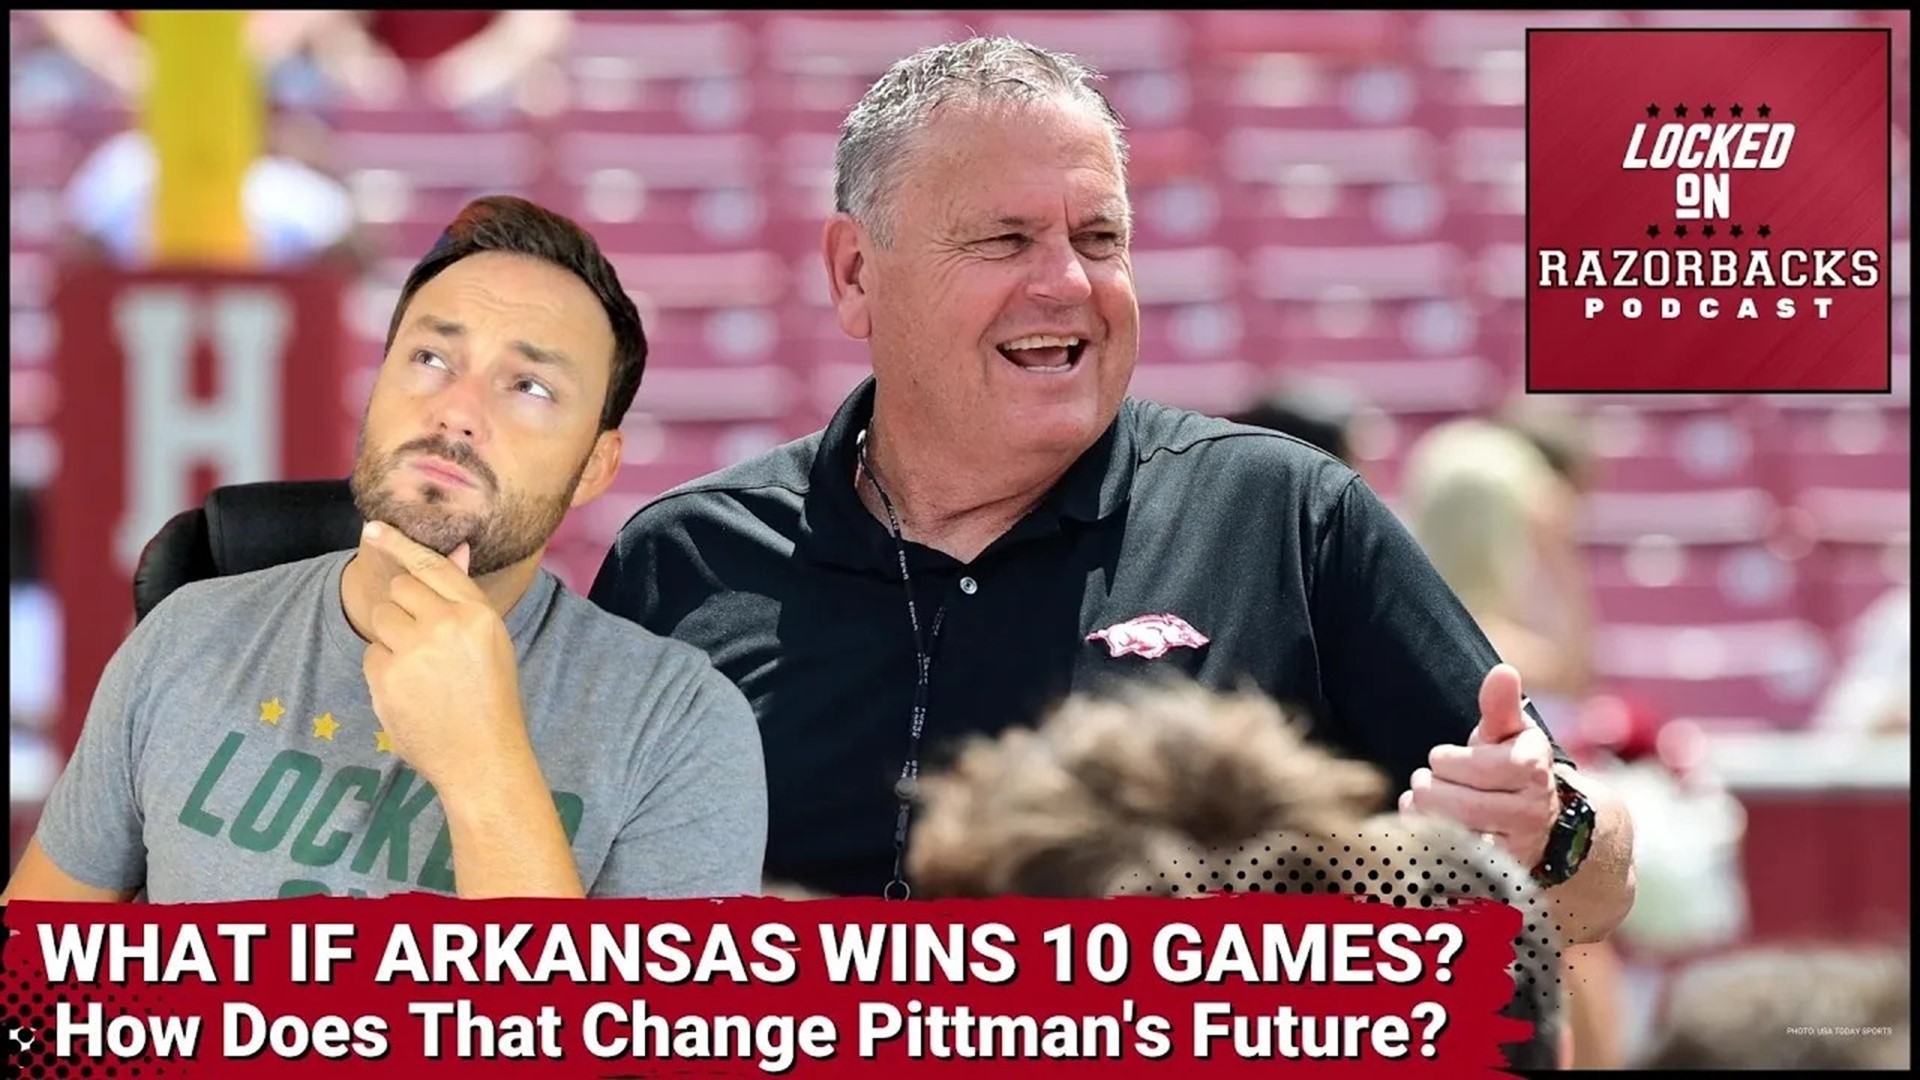 Arkansas fans have varied expectations for the upcoming football season, but almost none of them are predicting the Hogs to win double digit games.